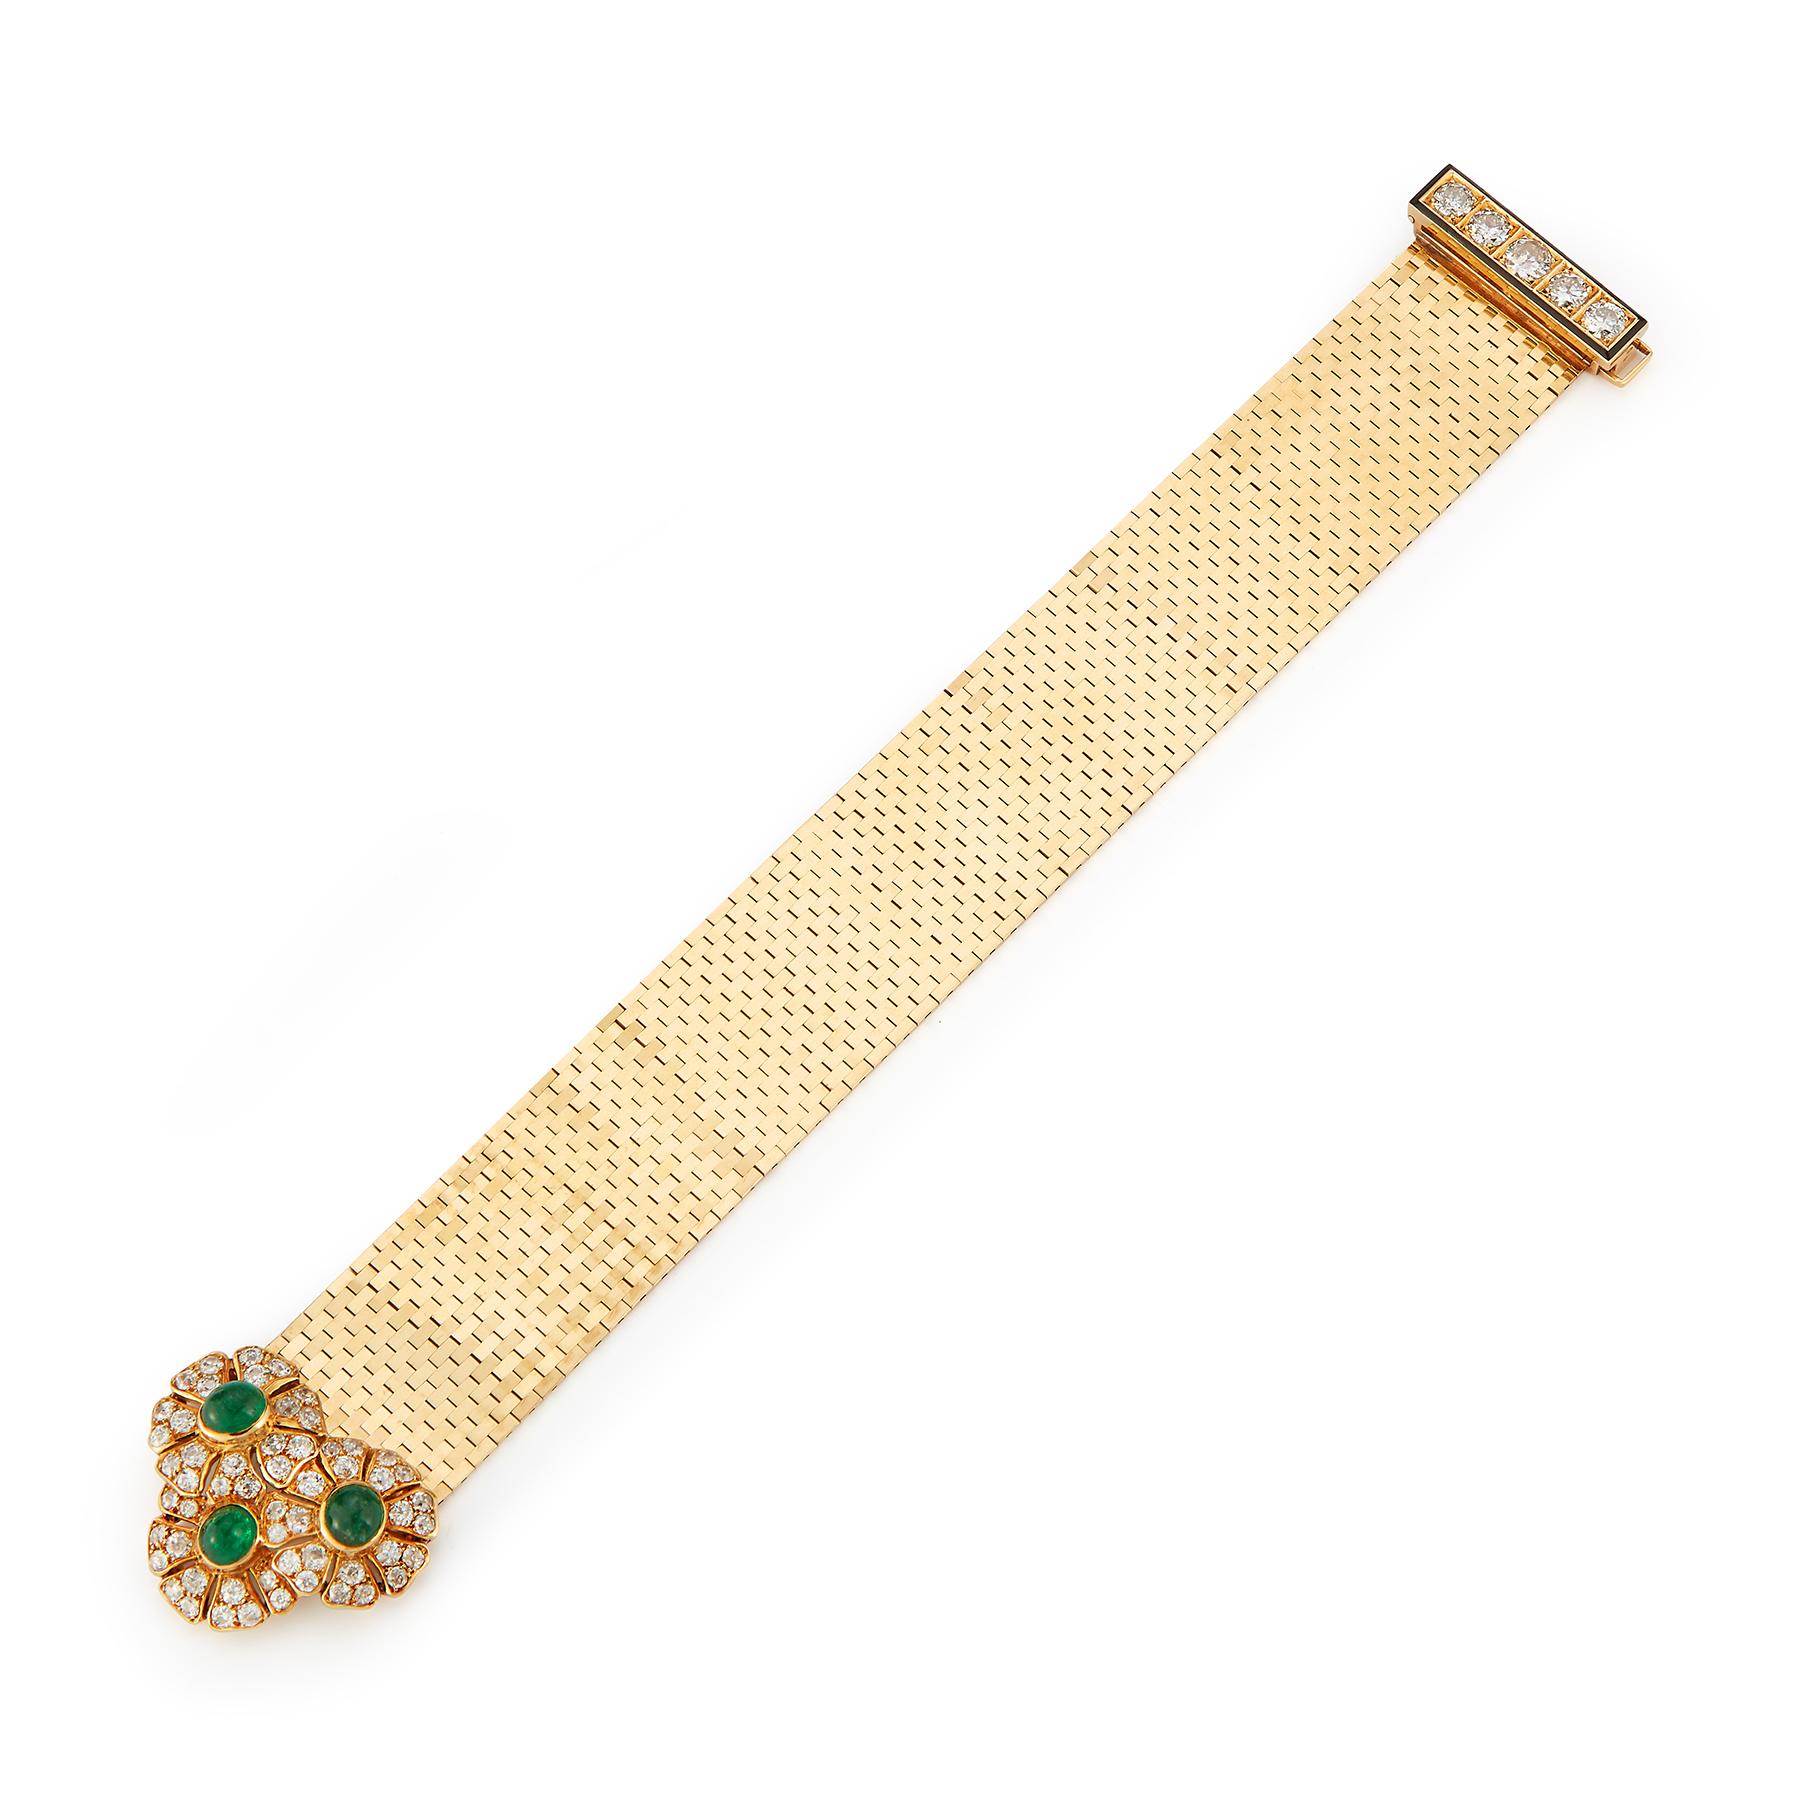 Iconic Van Cleef and Arpels Ludo Bracelet
3 large cabochon emeralds surrounded by 56 round cut diamonds & 5 larger antique cut diamonds on the clasp accented with black enamel. 
Signed and numbered. 
Made circa 1940
Gold Type: 18K Yellow Gold